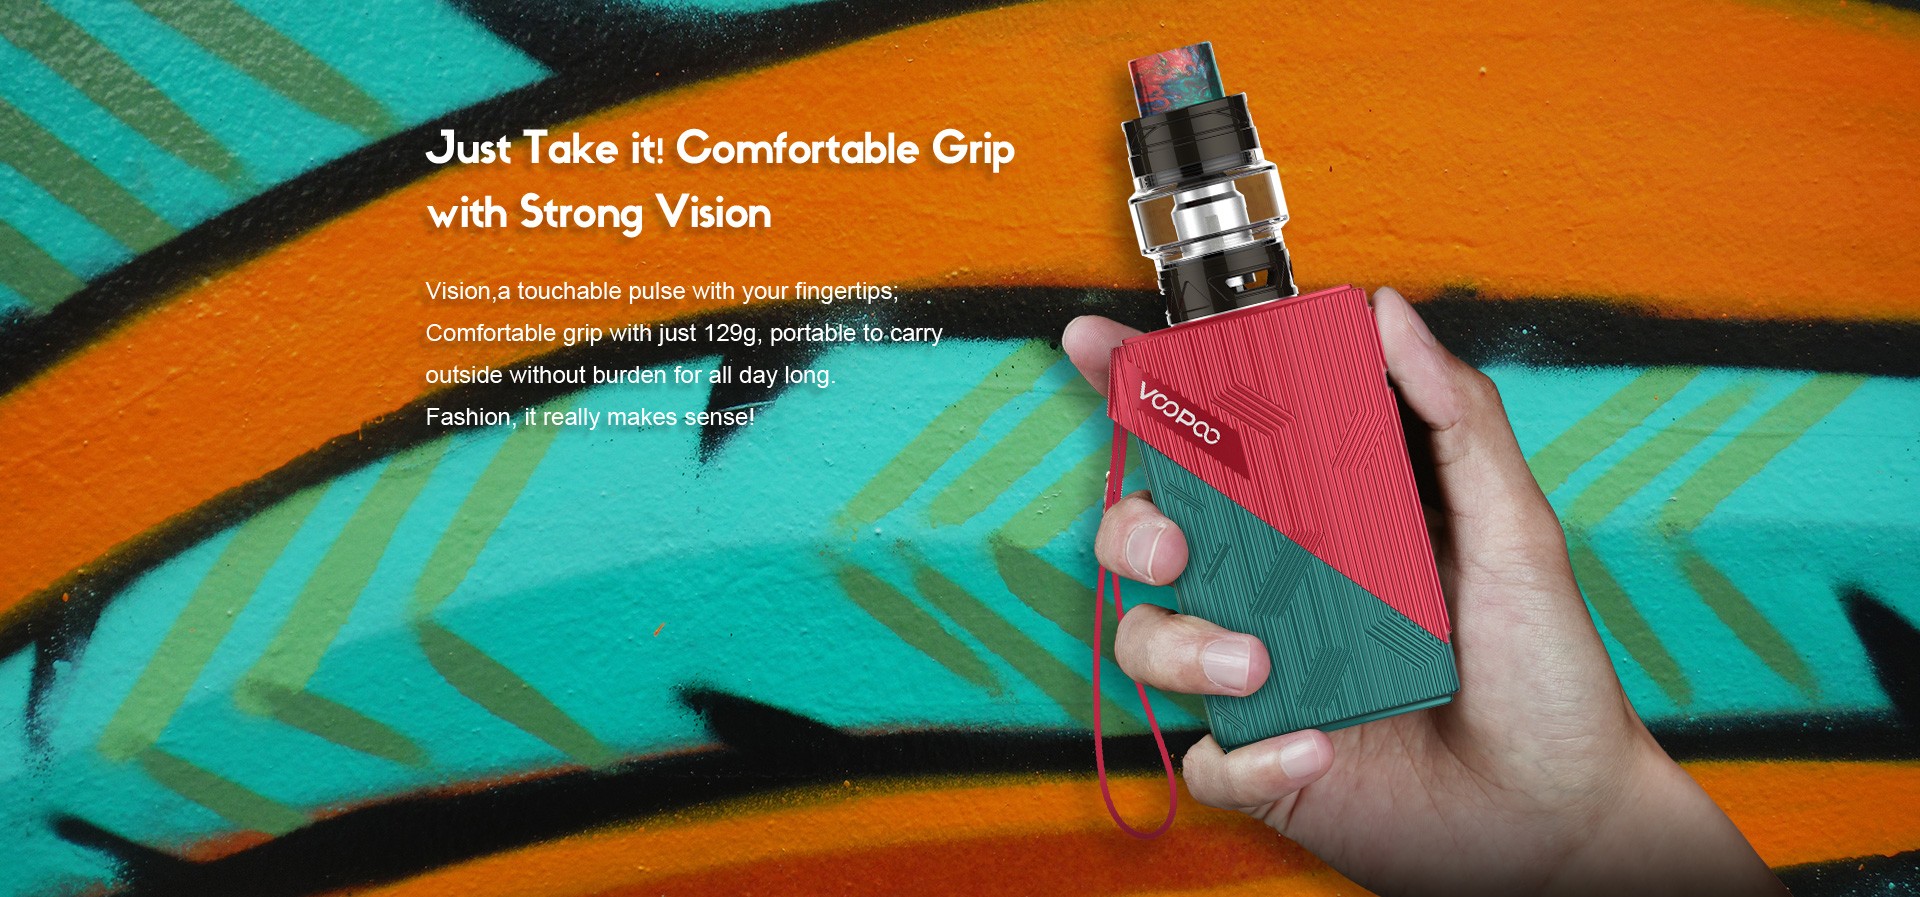 VOOPOO Find Kit 120W Matched with UFORCE T2 tank